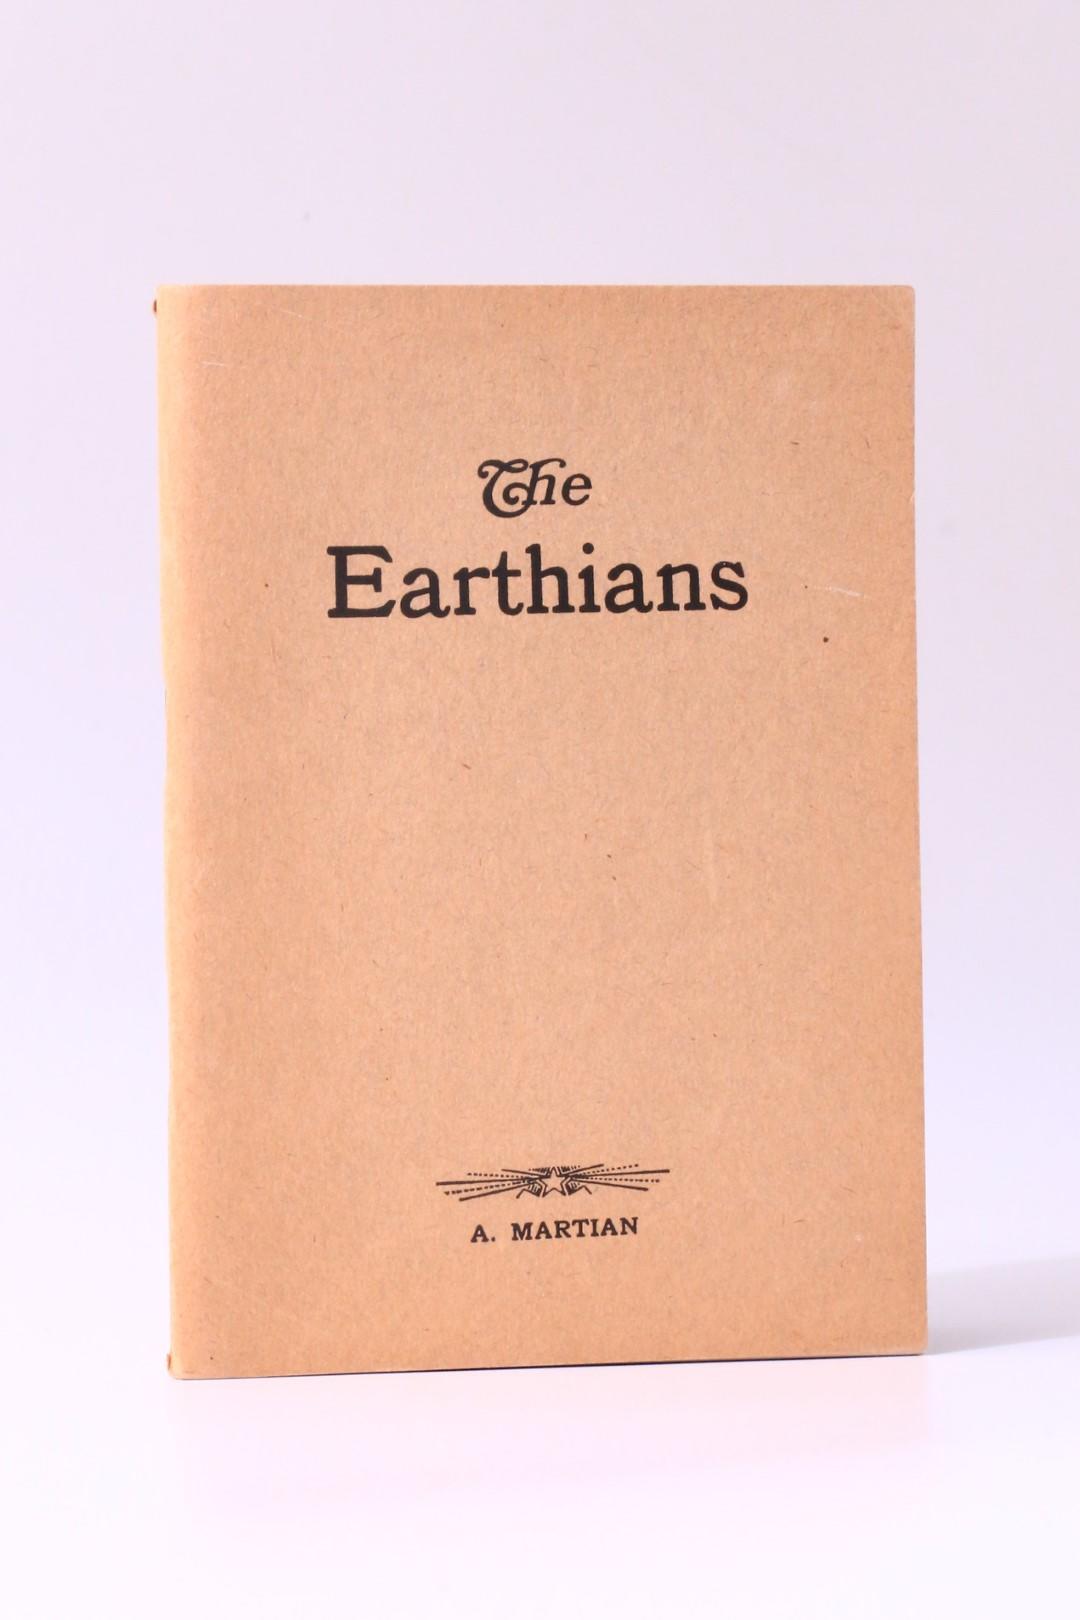 A Martian [Simon Wardwell?] - The Earthians - Privately Printed [?], 1918, First Edition.